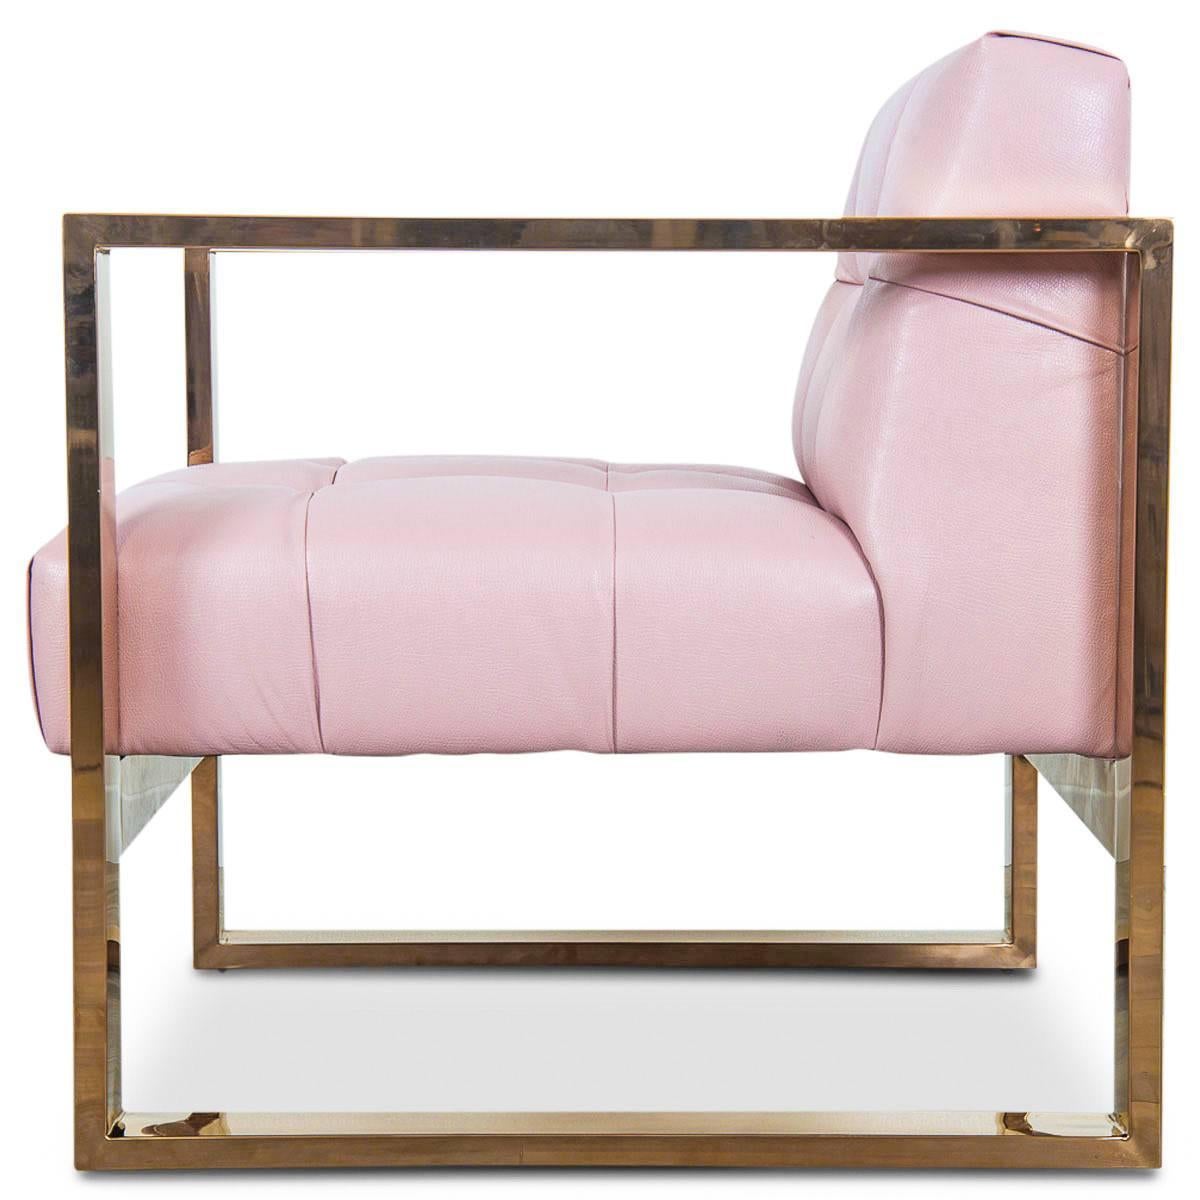 pink leather chair